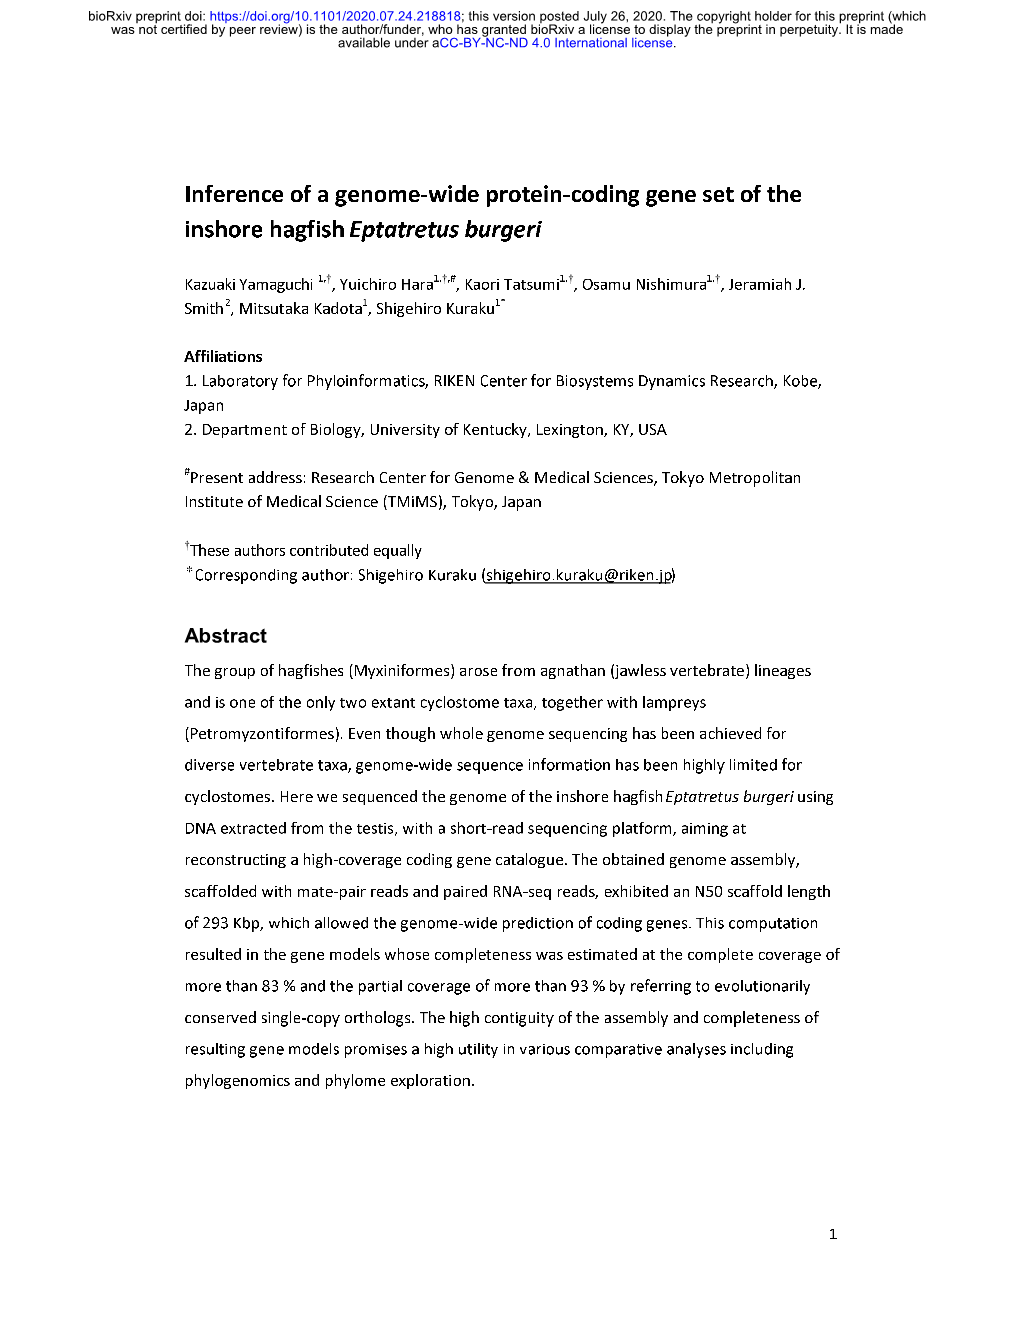 Inference of a Genome-Wide Protein-Coding Gene Set of the Inshore Hagfish Eptatretus Burgeri